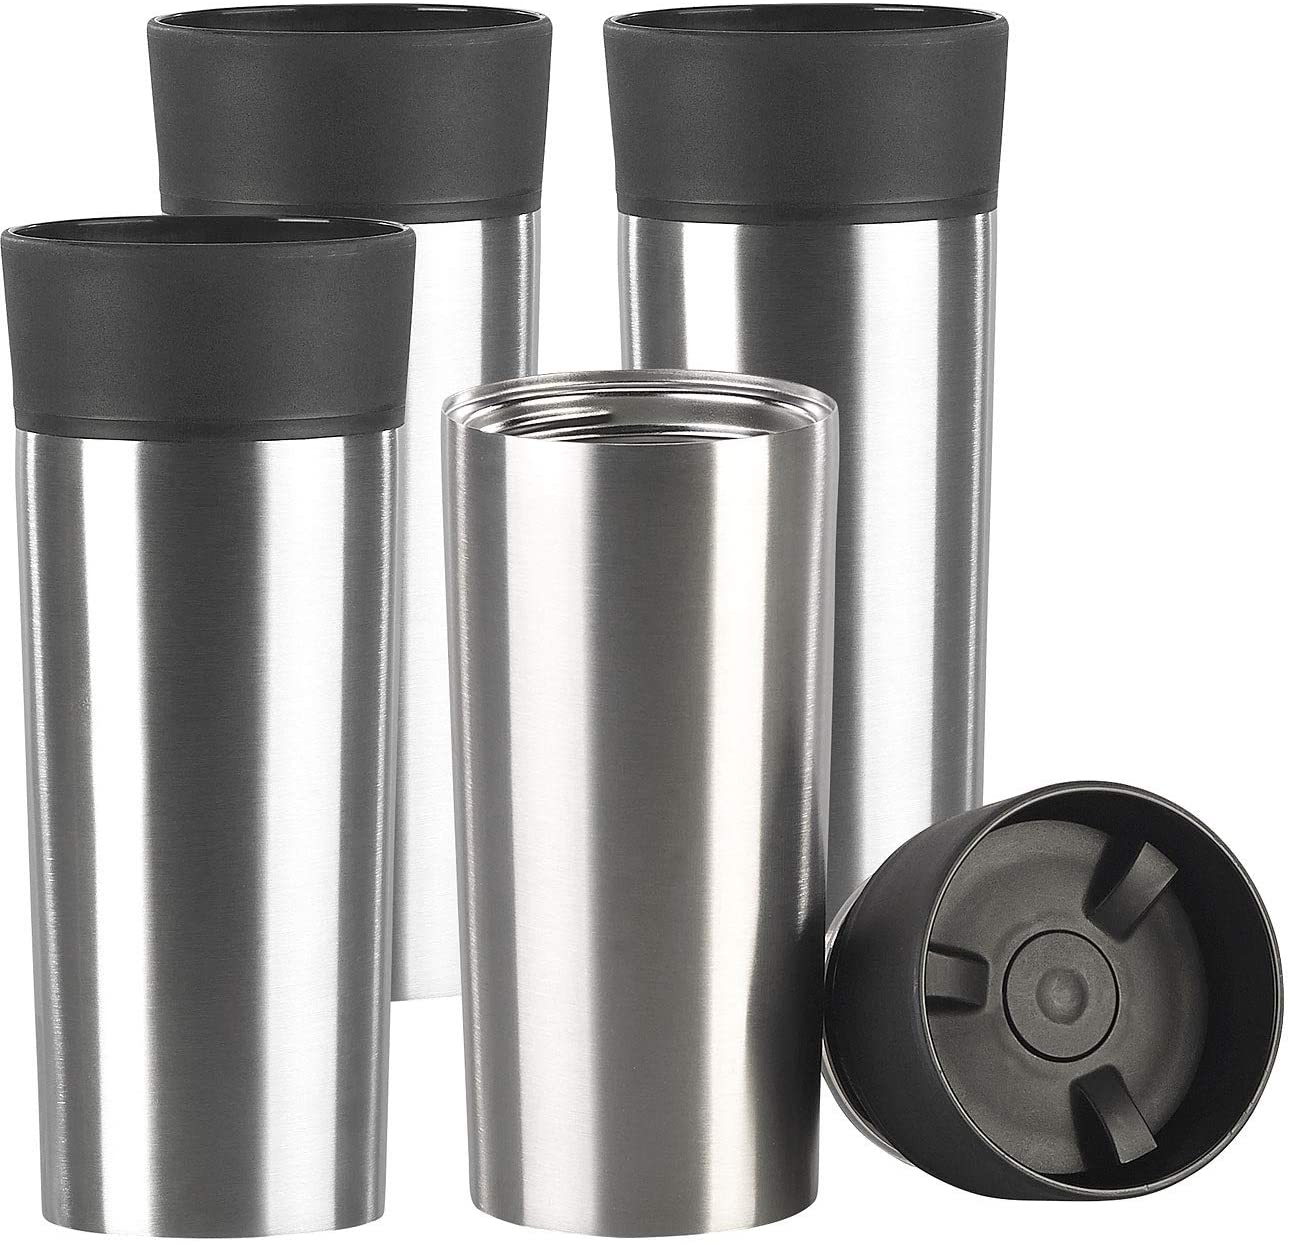 Rosenstein & Söhne Thermo Drinking Cups Set of 4 Stainless Steel Insulated Cups with Quick Press Seal 360 ml (Stainless Steel)